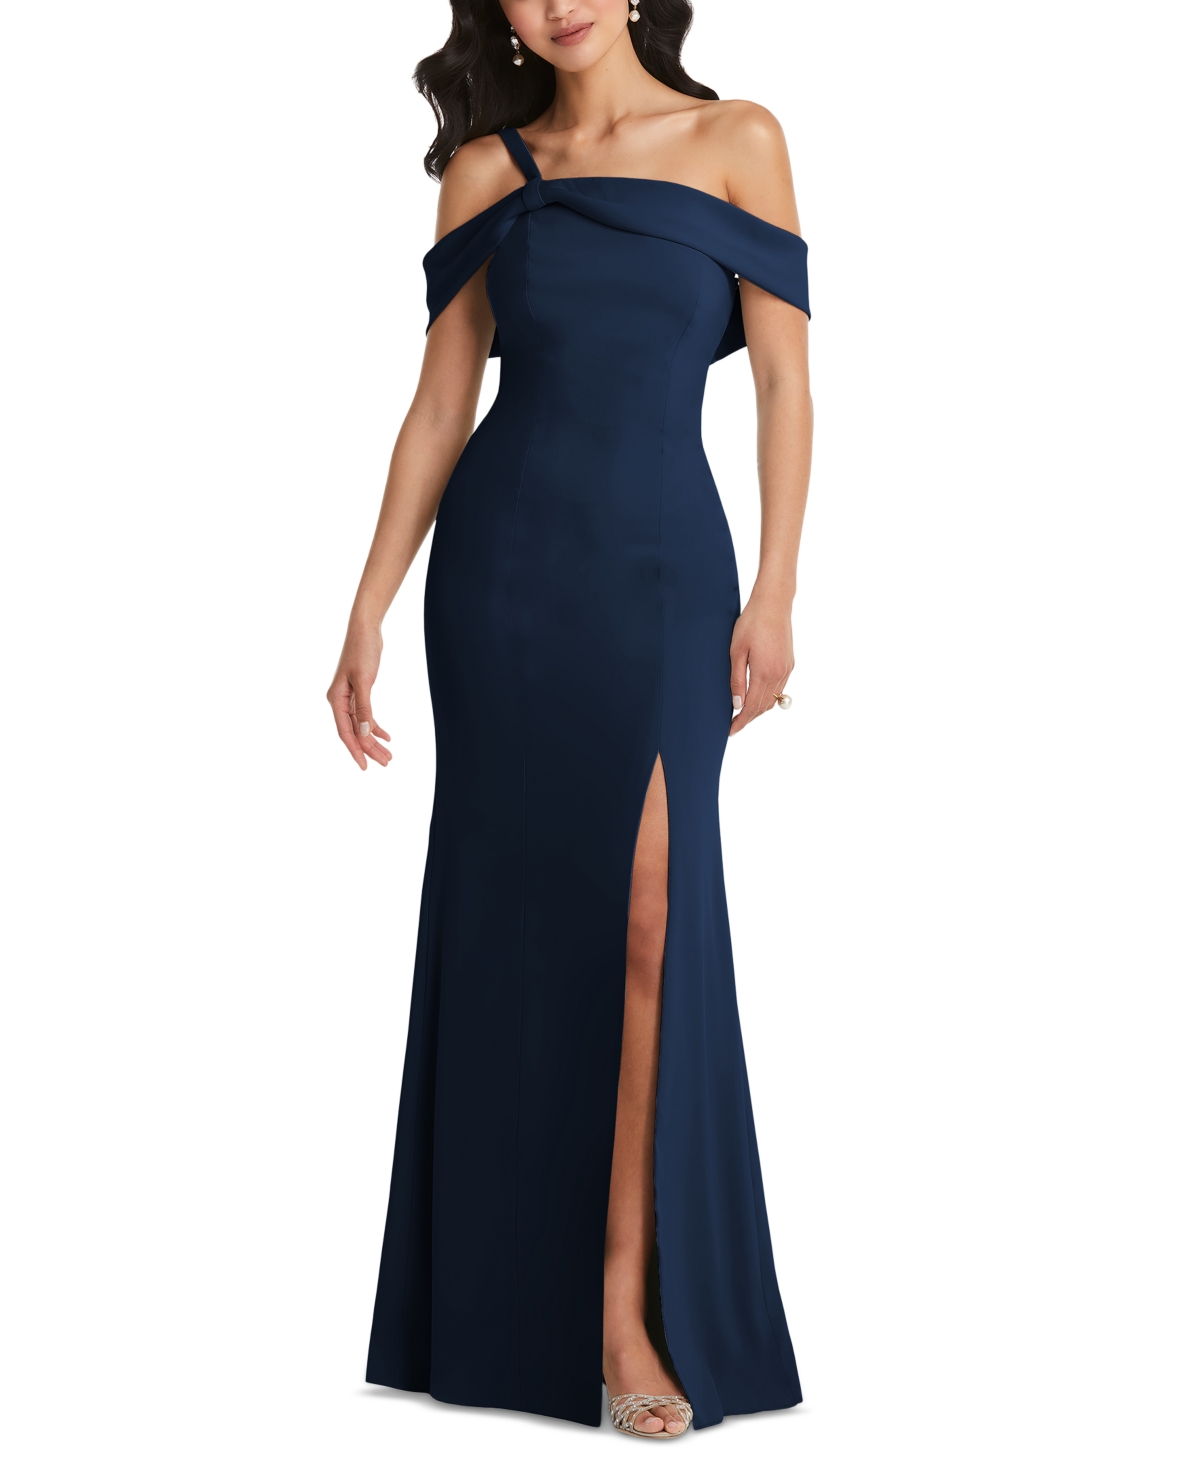 Plus Size One-Shoulder Draped Cuff Maxi Dress with Front Slit - Midnight navy